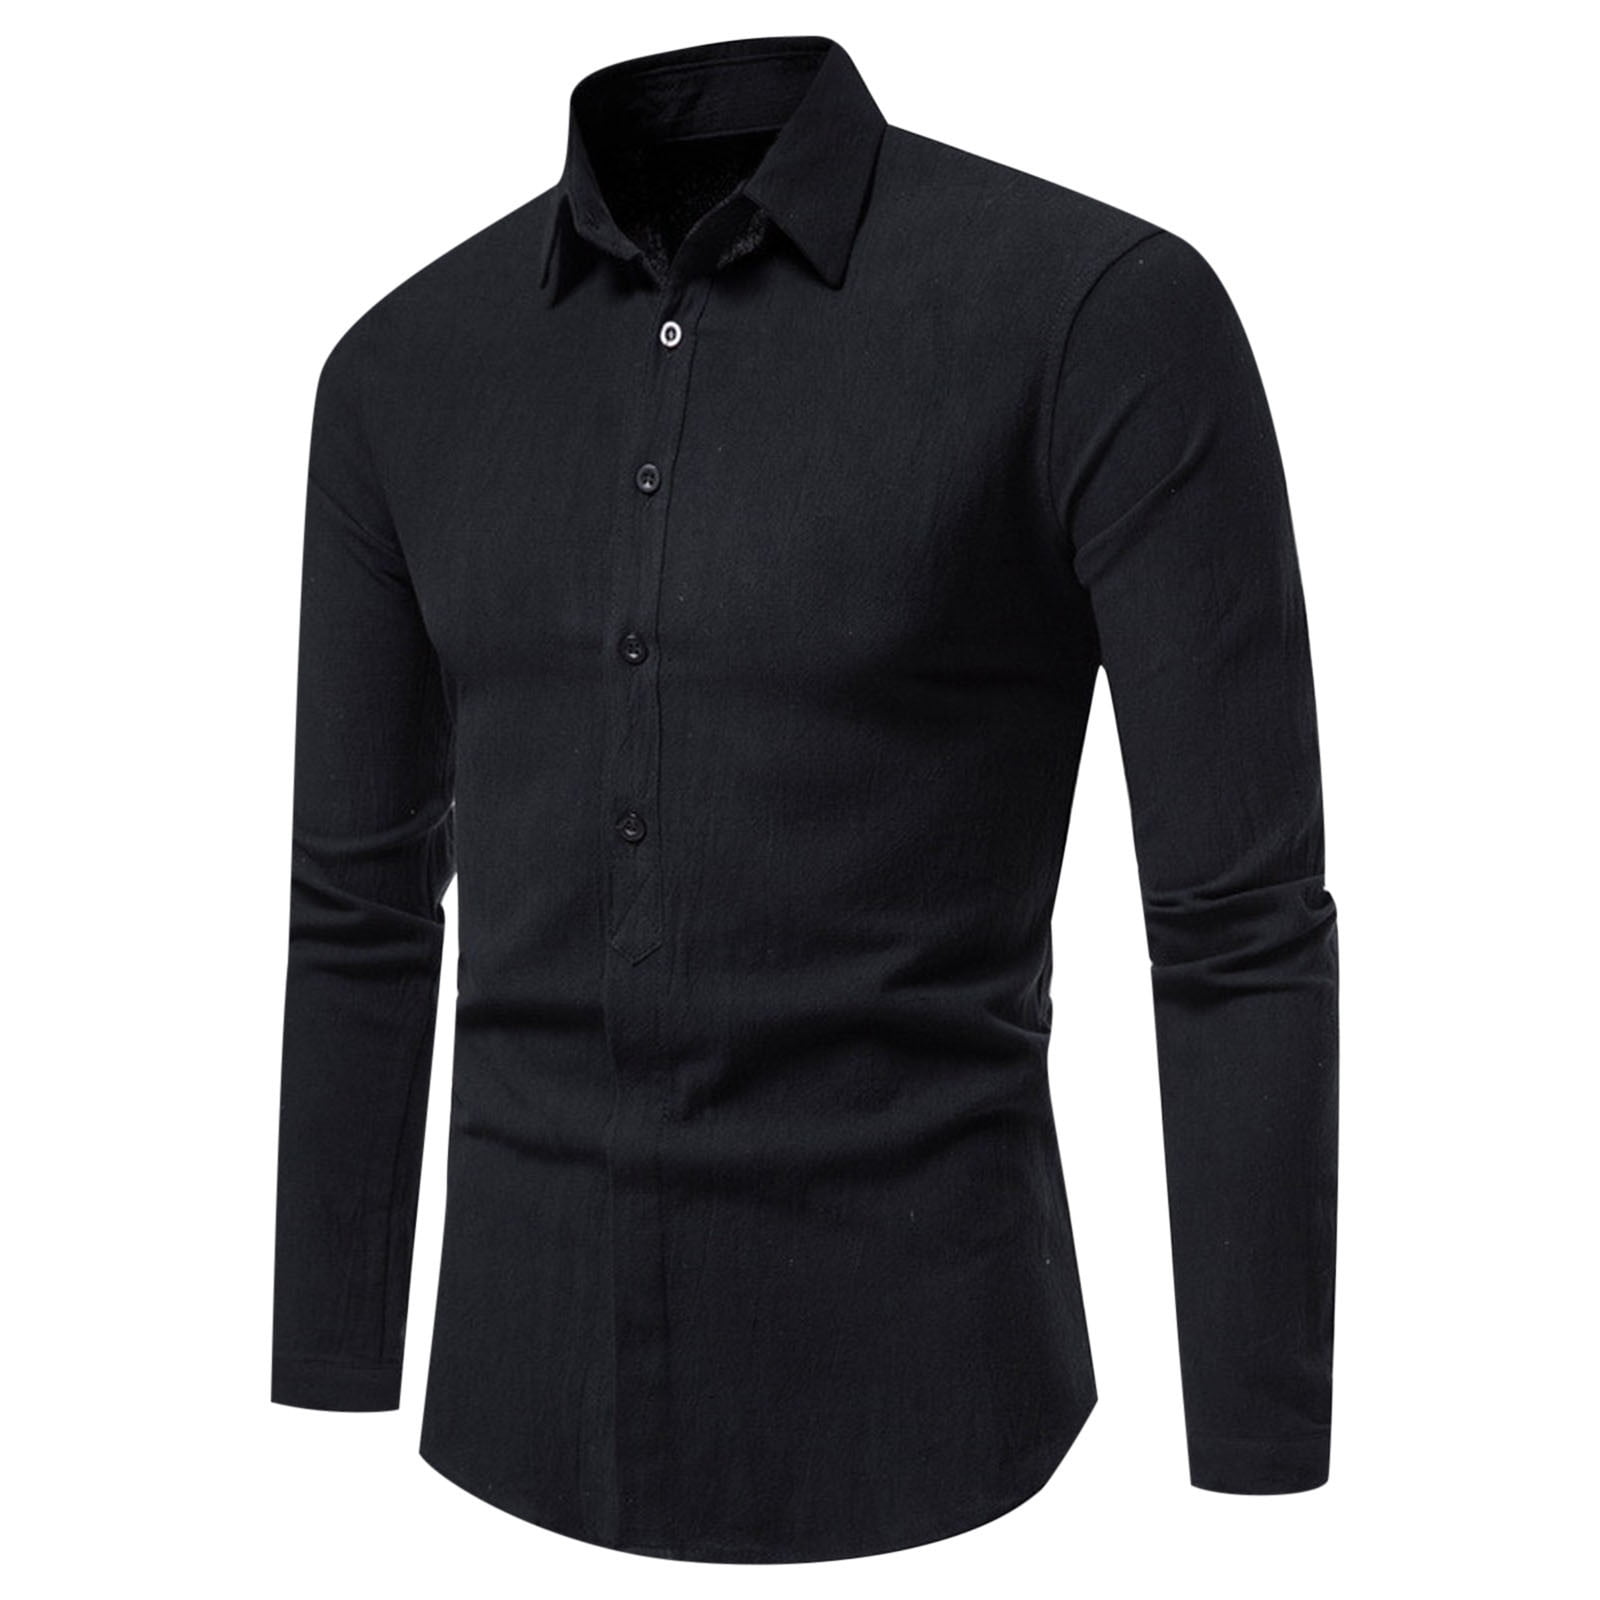 IROINNID Bussiness Shirts for Men Solid Color Button Down Long Sleeve ...